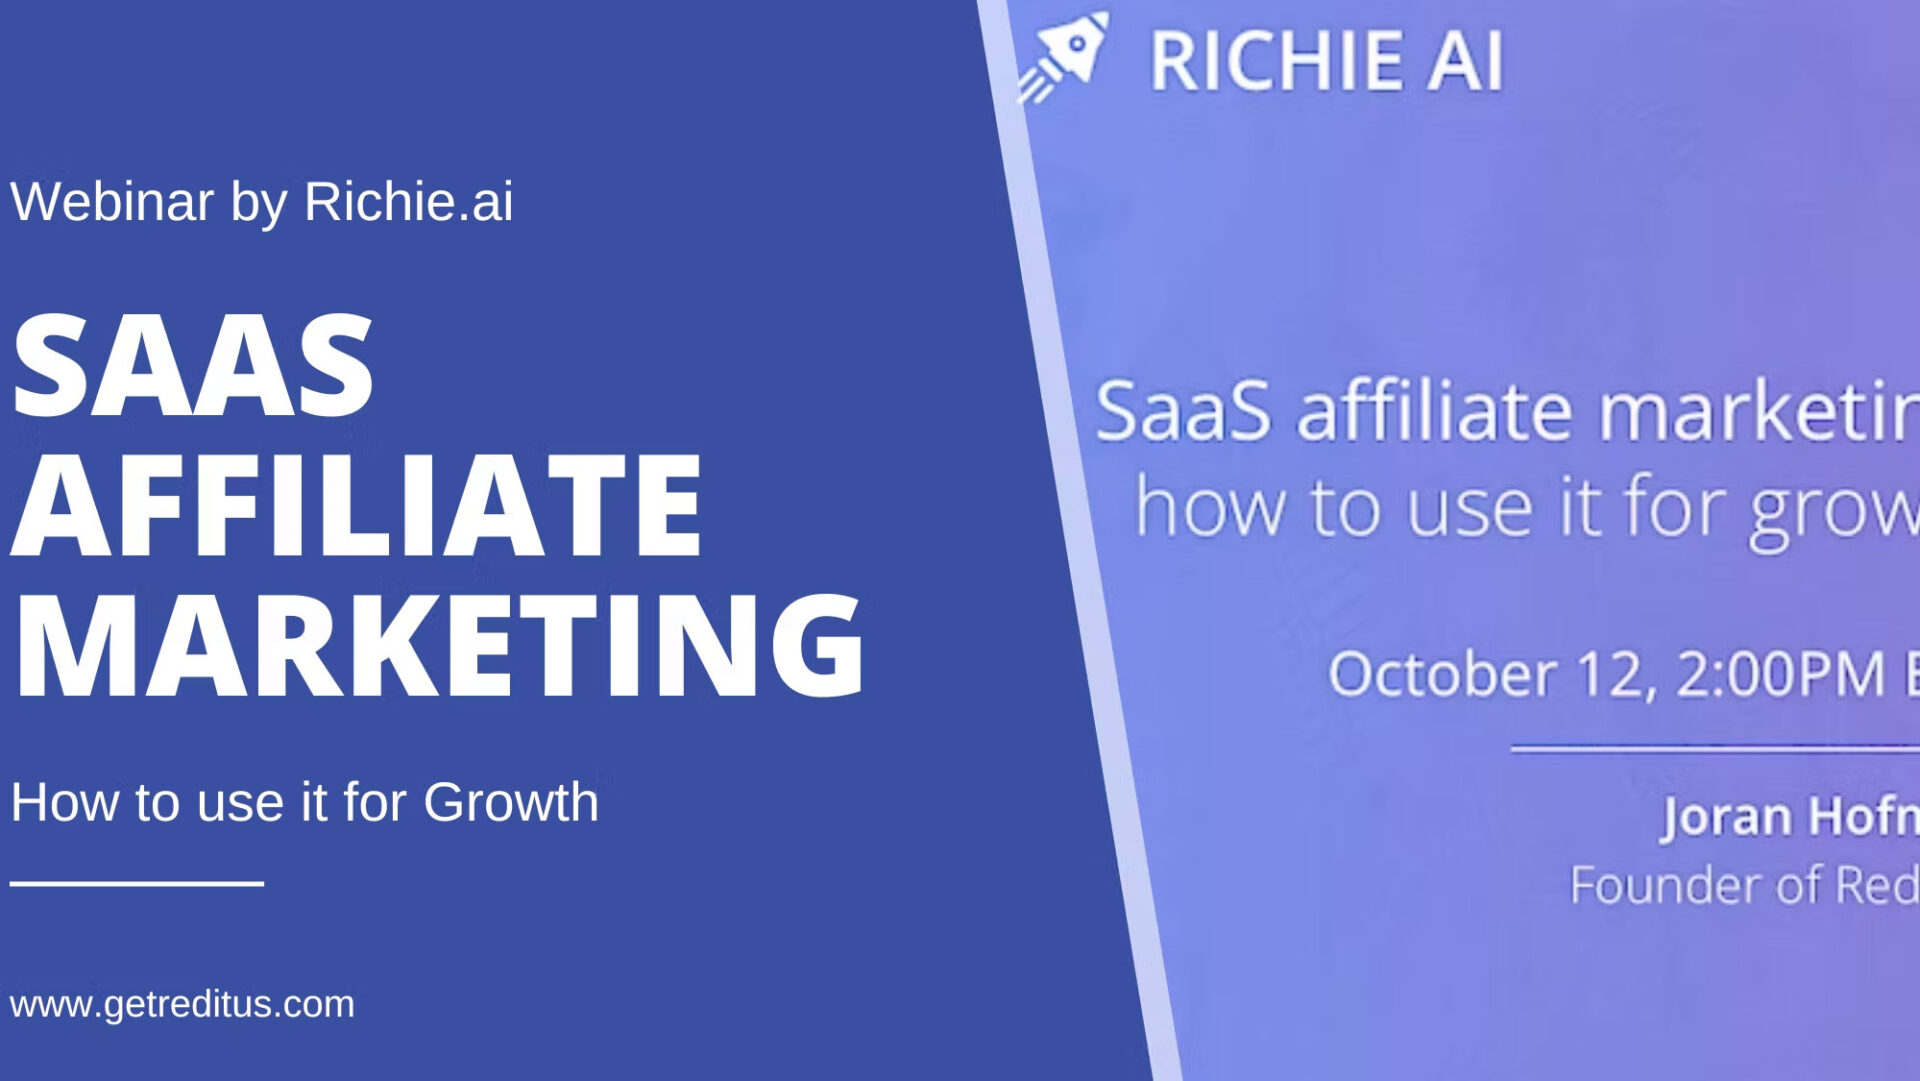 https://www.getreditus.com/blog/saas-affiliate-marketing-how-to-use-it-for-growth/